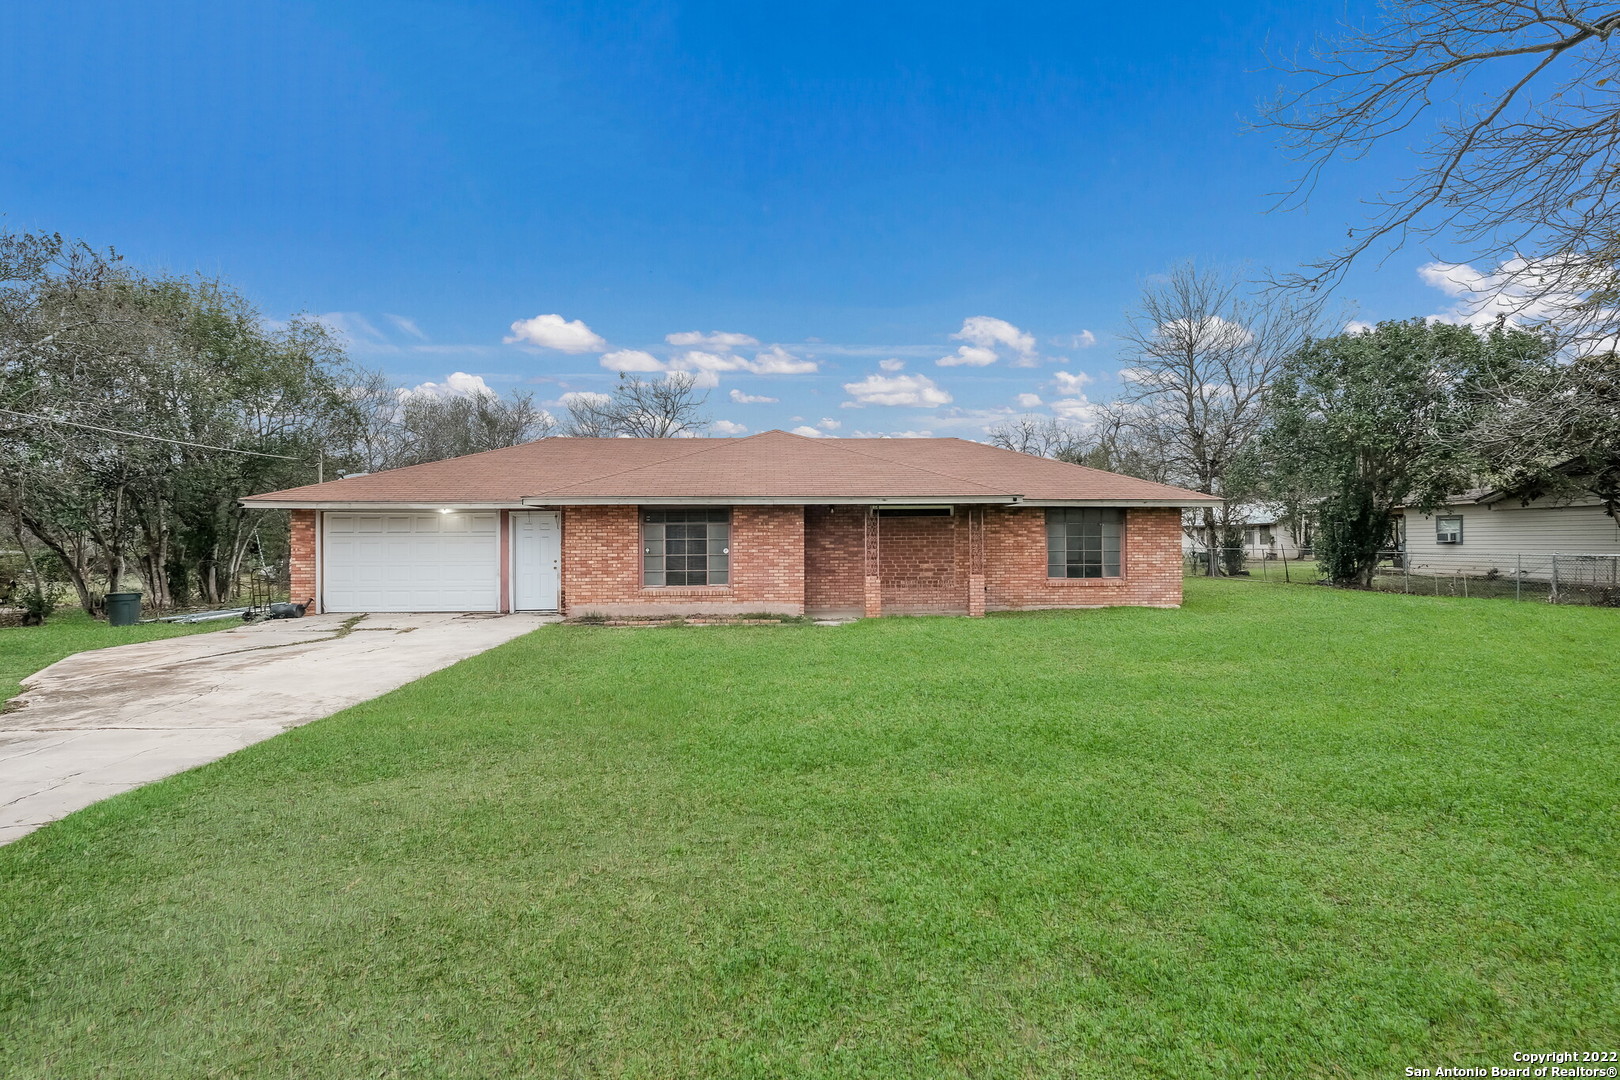 Have you been searching for a 1 ACRE property that is private, minutes away from downtown San Antonio, and located near major highways, restaurants and shopping? Well look no further because this is the one for you! This spacious, 4 side brick home sits on a large 1 acre lot with plenty of space and trees galore! With an open floor plan and all the rooms tucked away privately on one side of the home, this home is ready for you to give it some "TLC" and make it your own with some fresh cosmetic updating. Sit on the back patio and imagine all the possibilities of what you can do with 1 acre! Homes with this much land so close to the city are hard to find, so make sure you go and see it today!